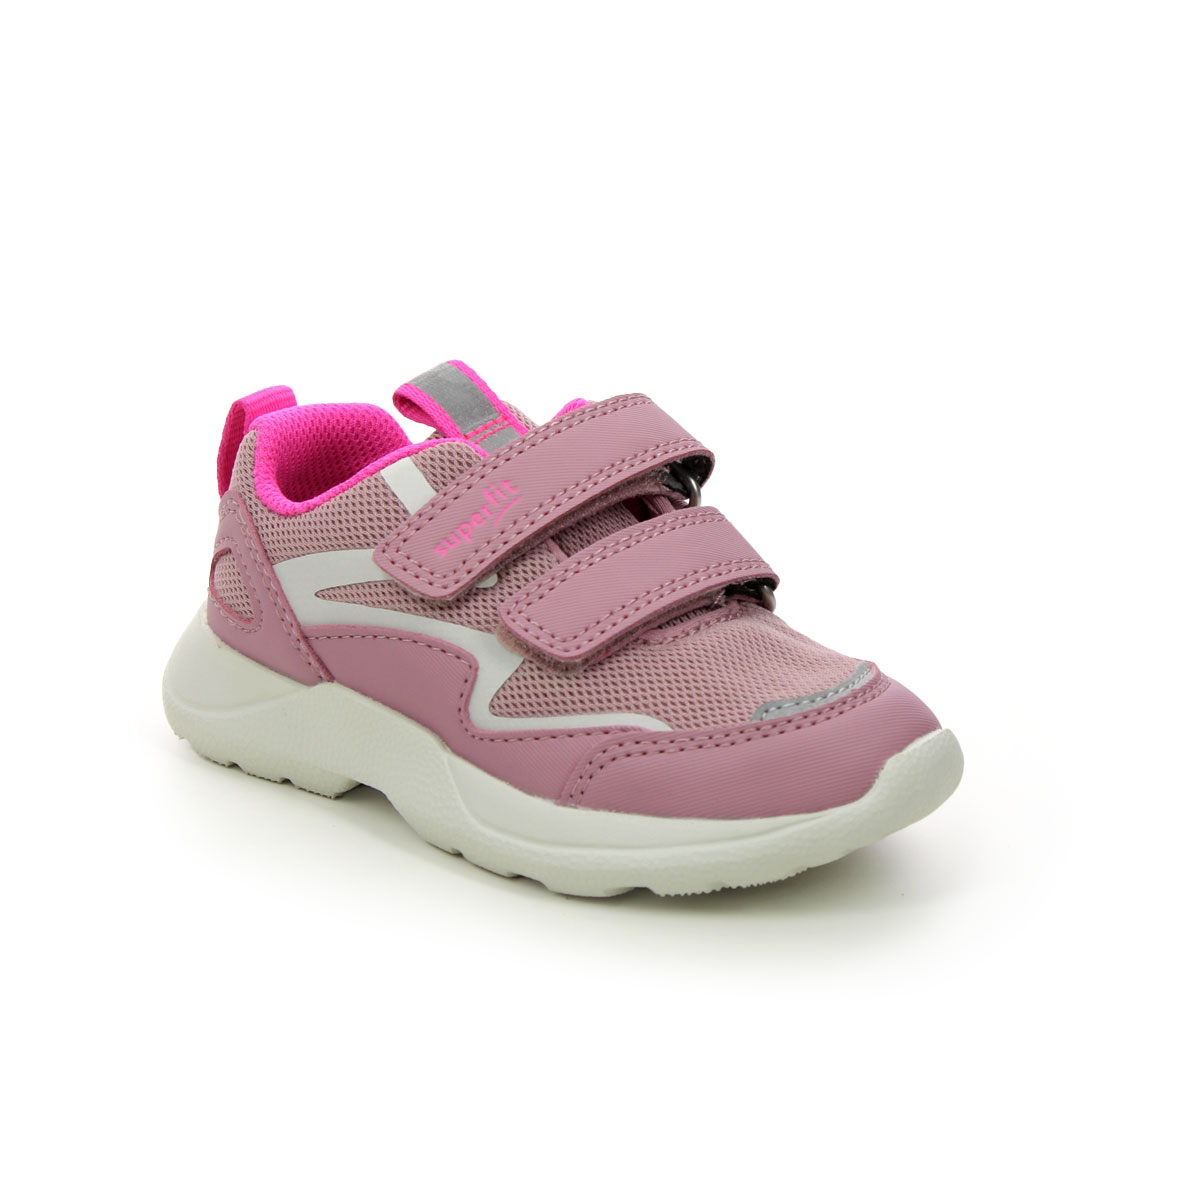 Superfit Rush Mini Pink Kids girls trainers 1006206-5510 in a Plain Man-made in Size 23